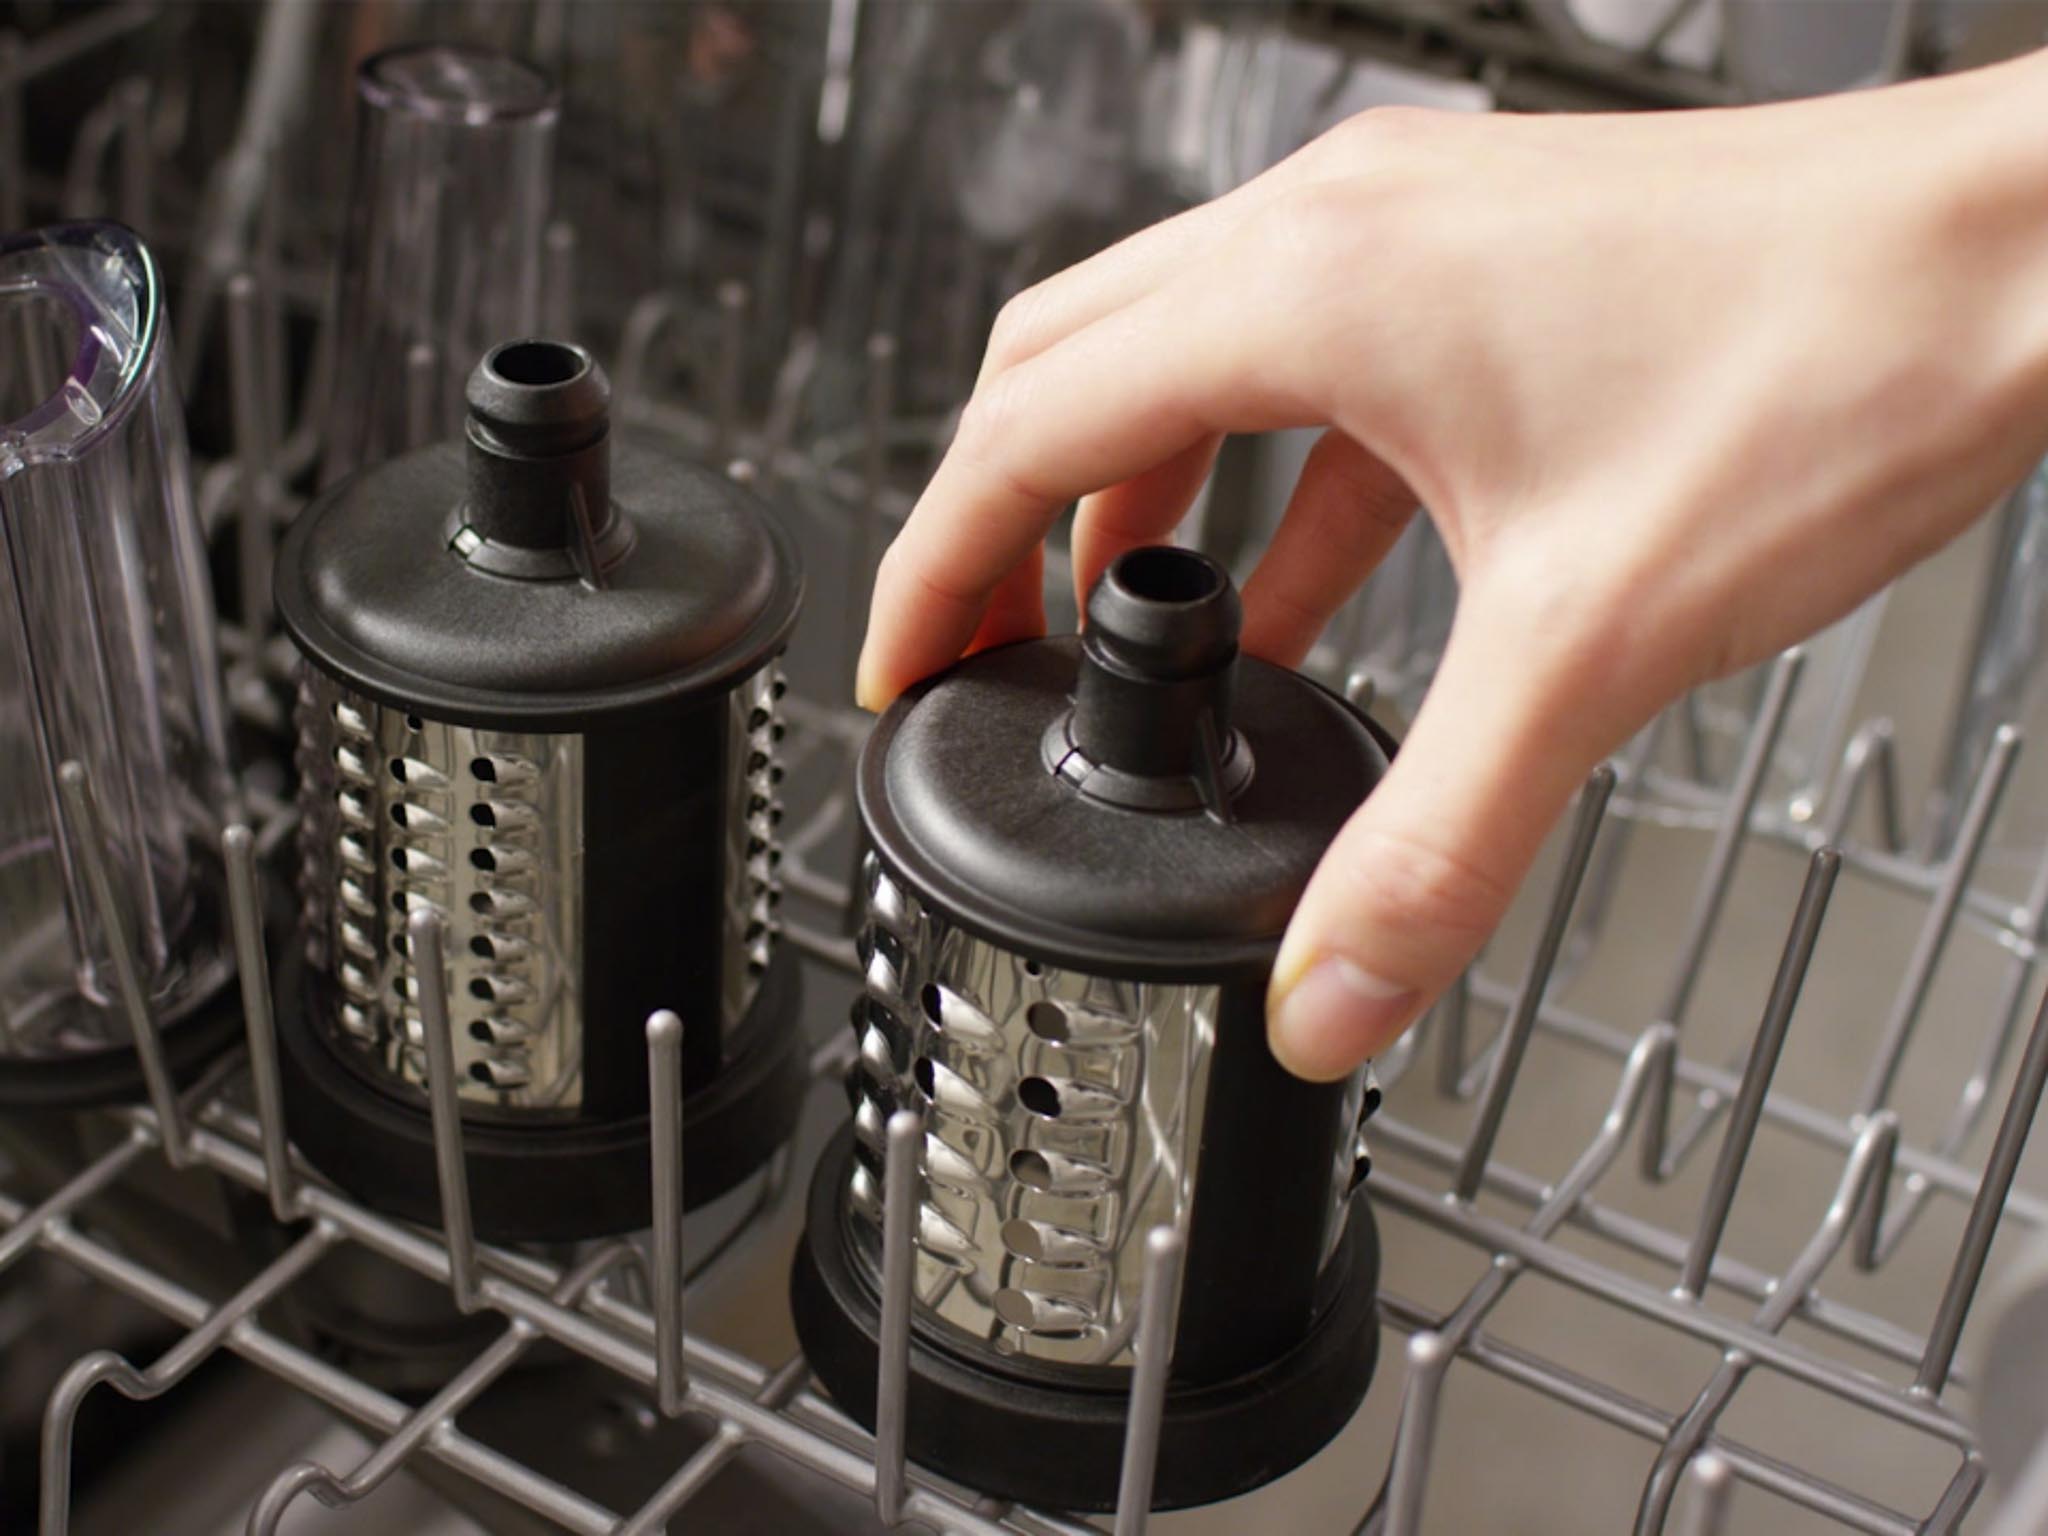 Mixer Attachment Vegetable Shredder and Grater Extension Pack In the Dishwasher